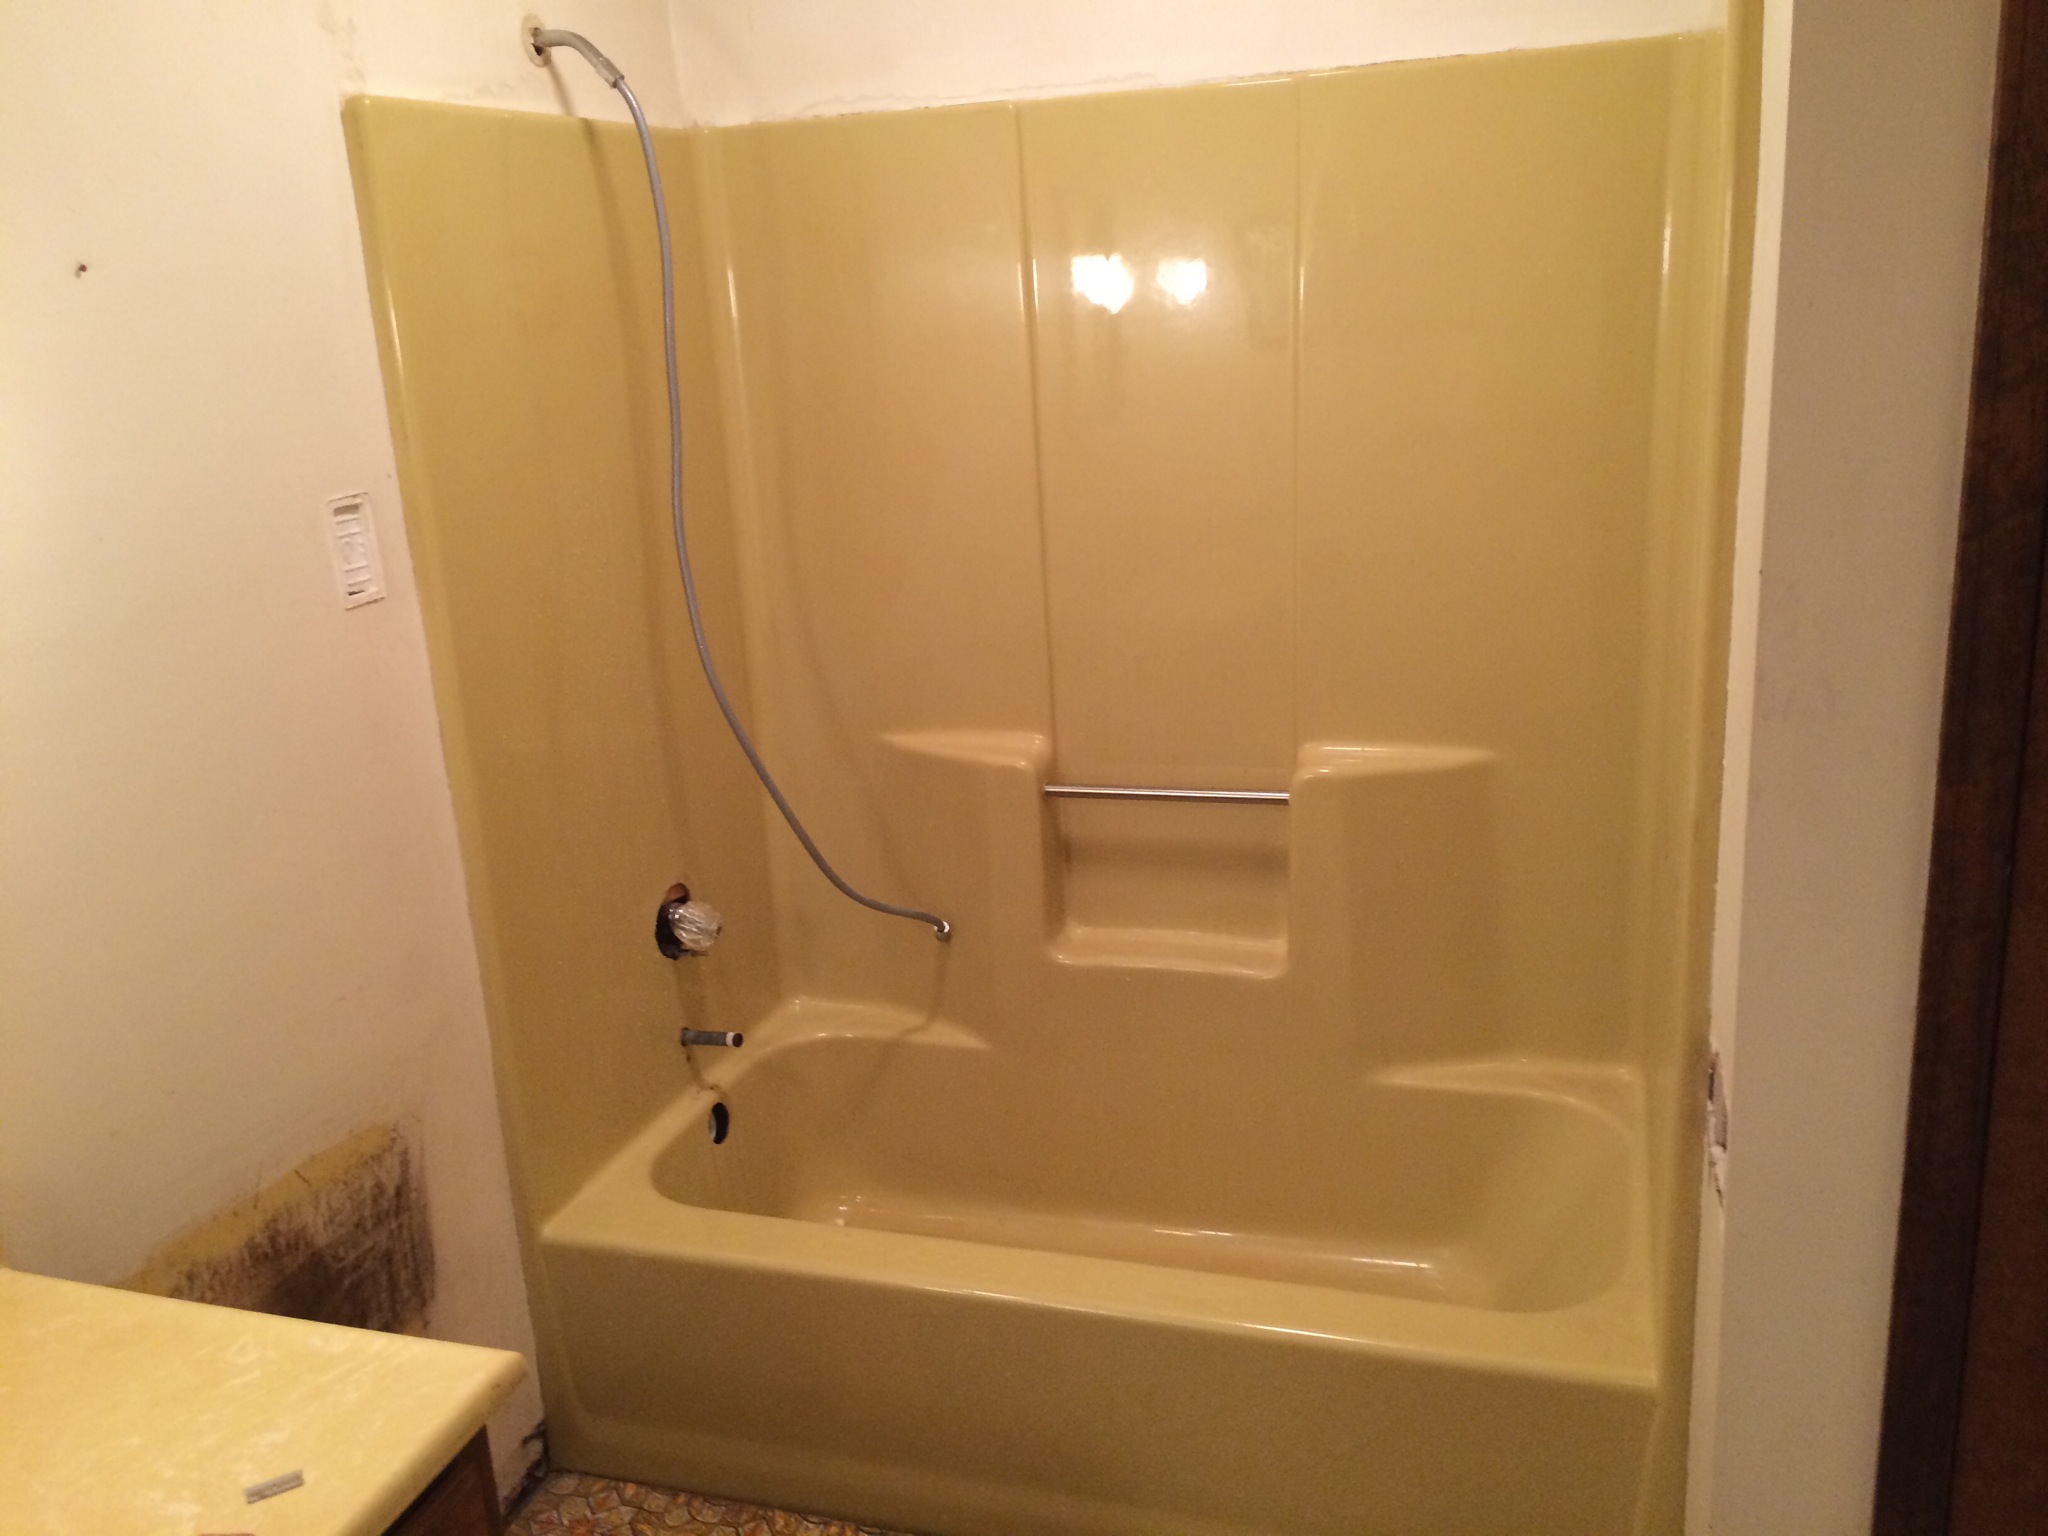 Can A Fiberglass Tub Be Resurfaced, What Do You Use To Resurface A Bathtub